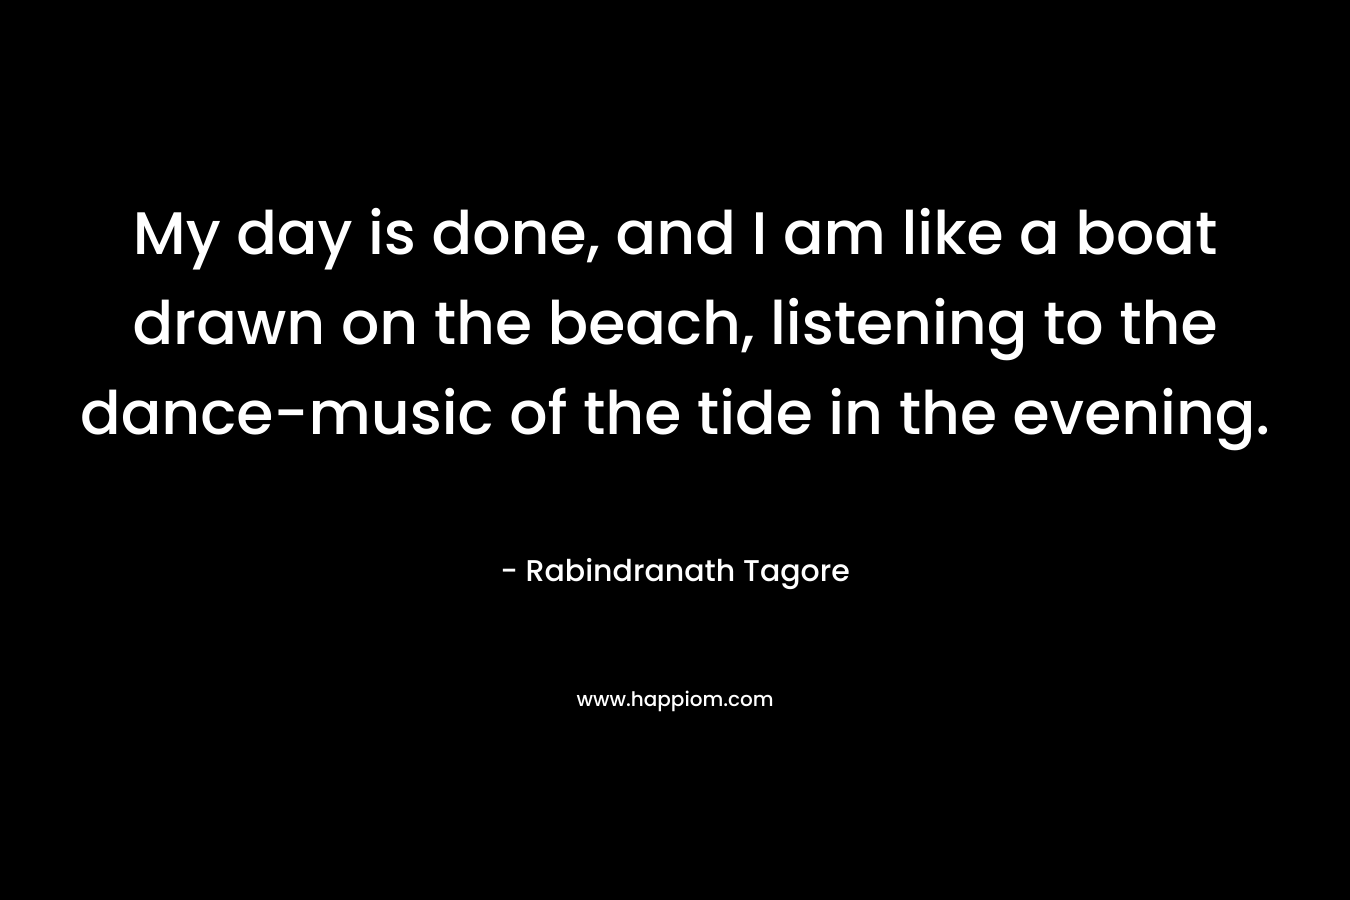 My day is done, and I am like a boat drawn on the beach, listening to the dance-music of the tide in the evening.